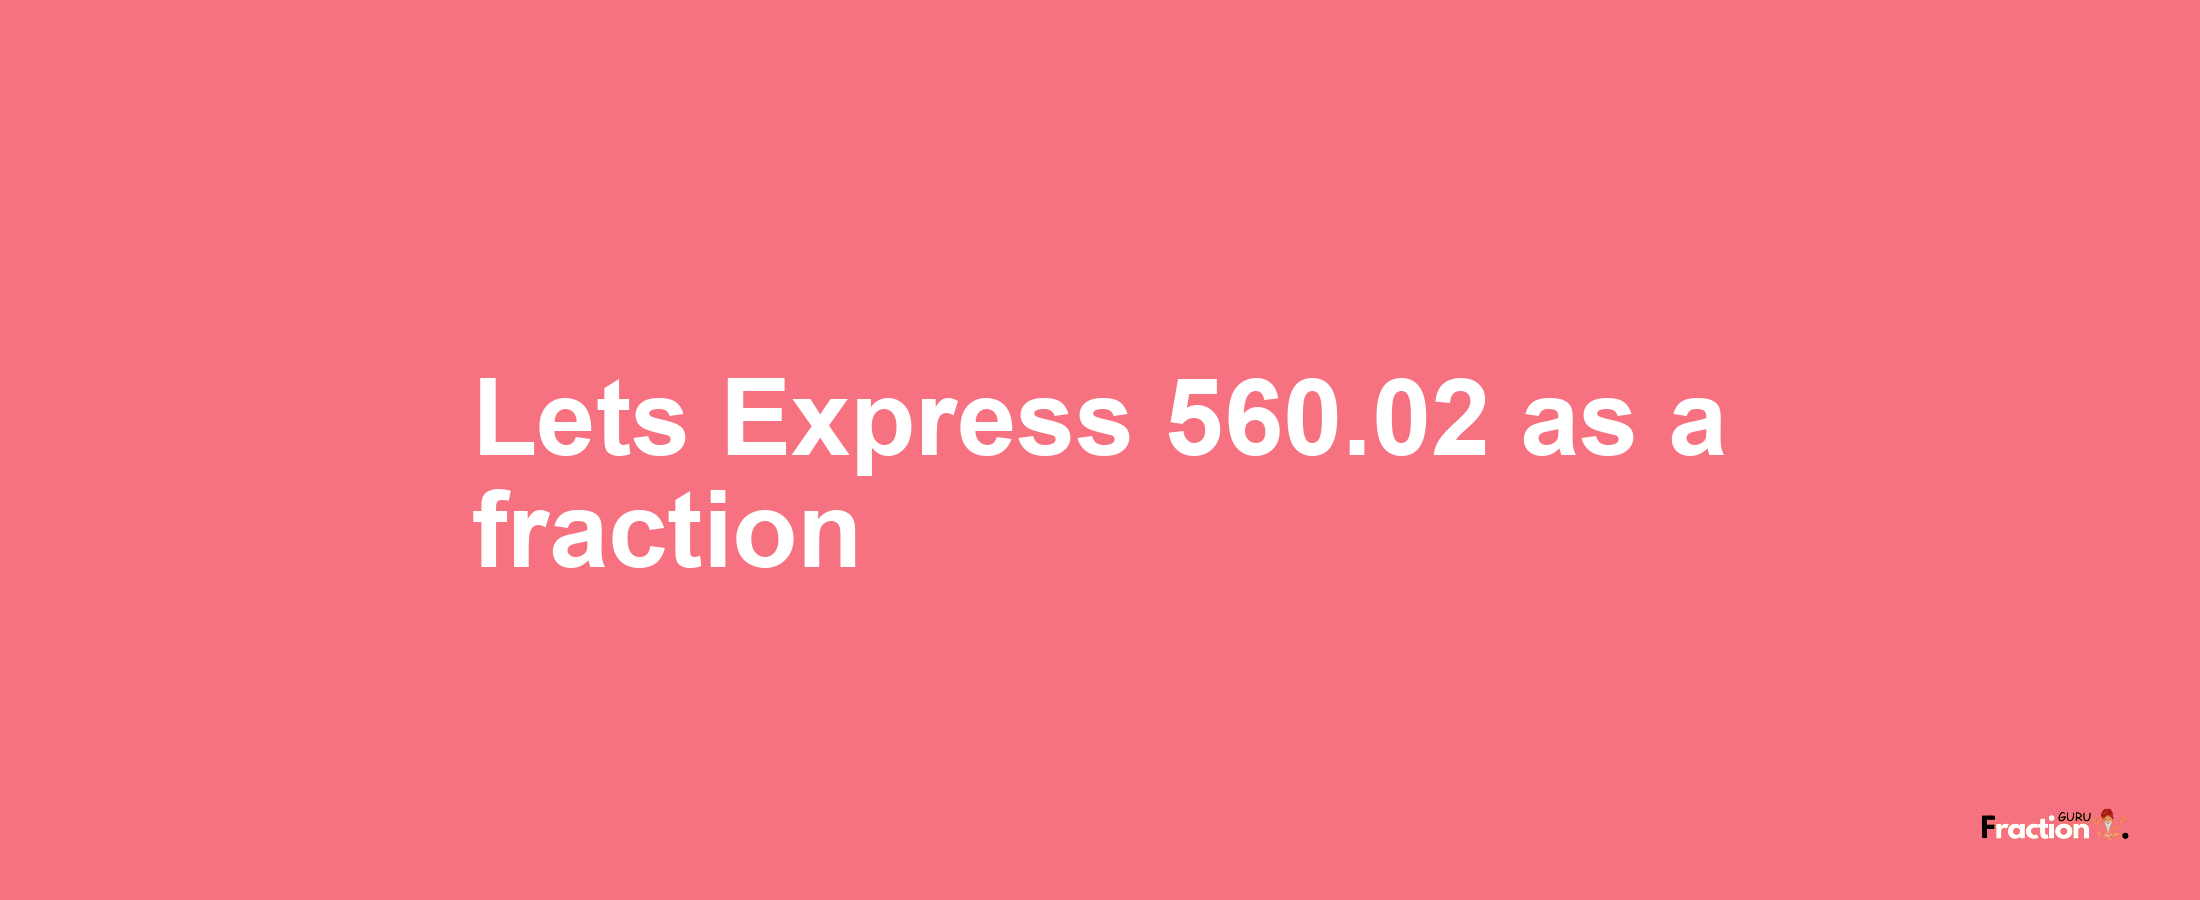 Lets Express 560.02 as afraction